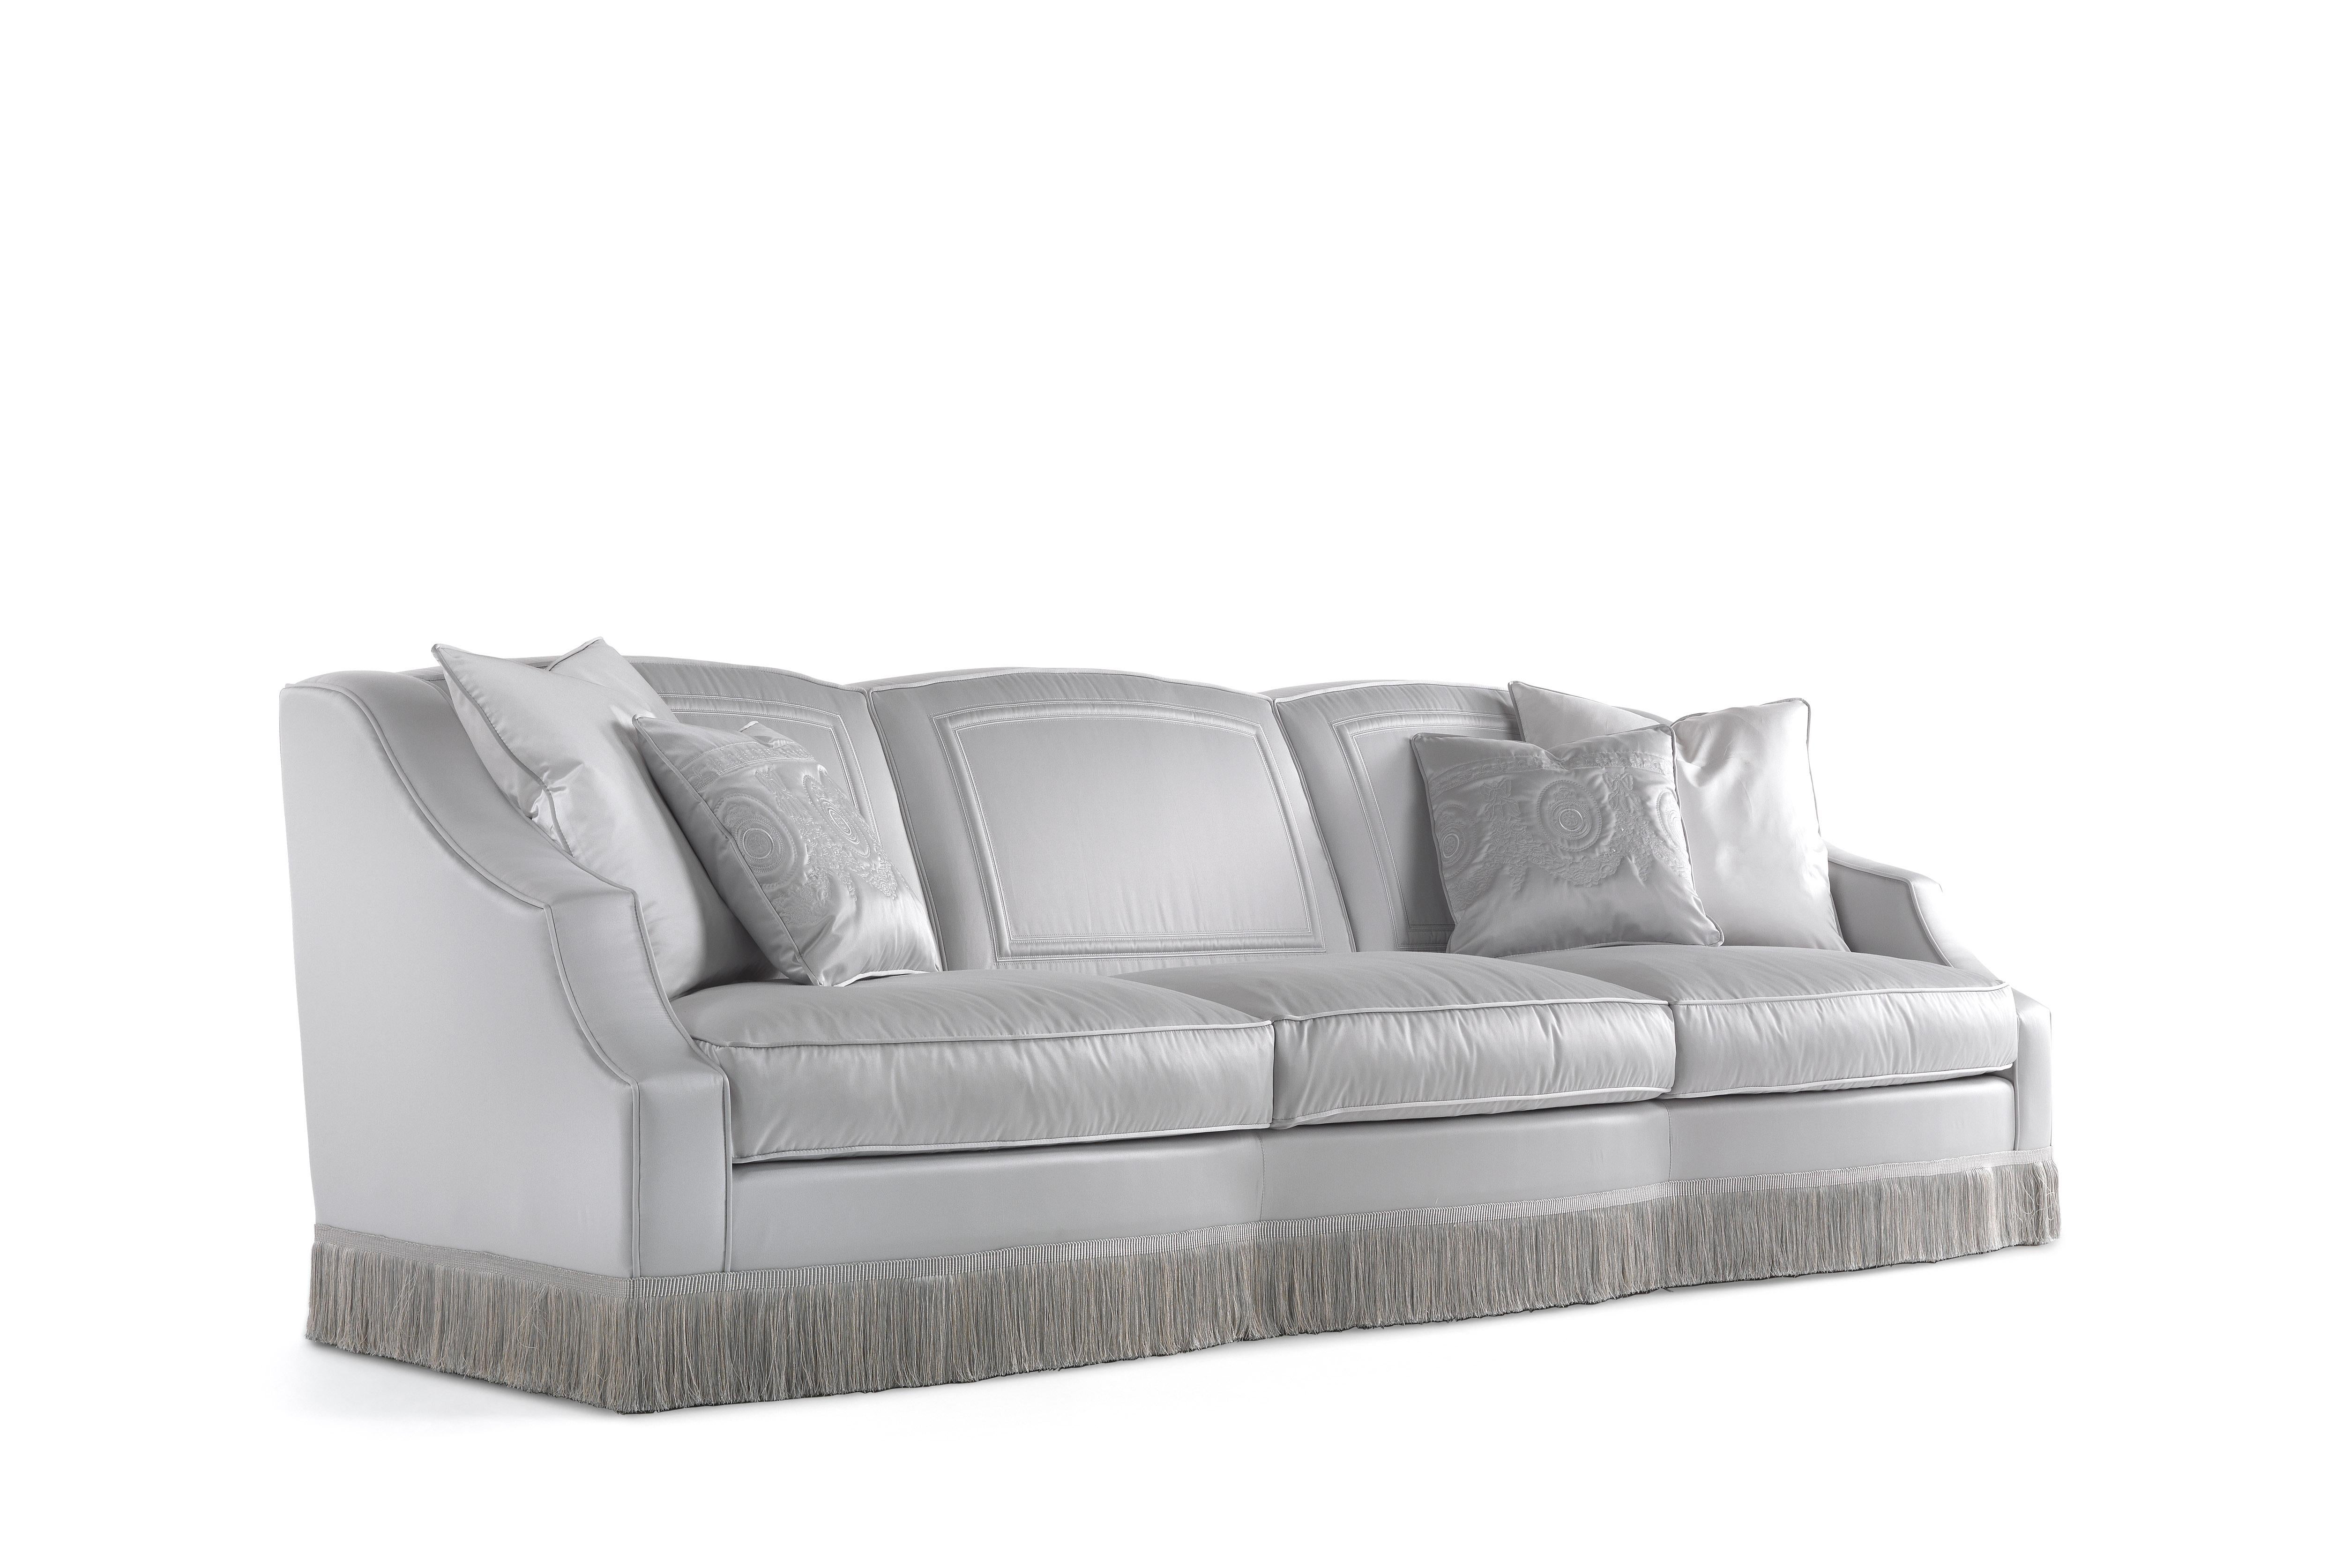 Wheidon is a sophisticated line with a classic shape and soft angles. Its main feature is the upholstery, characterized by special decorative strings in relief. A piece of furniture with a distinctively classic style, perfectly expressing the